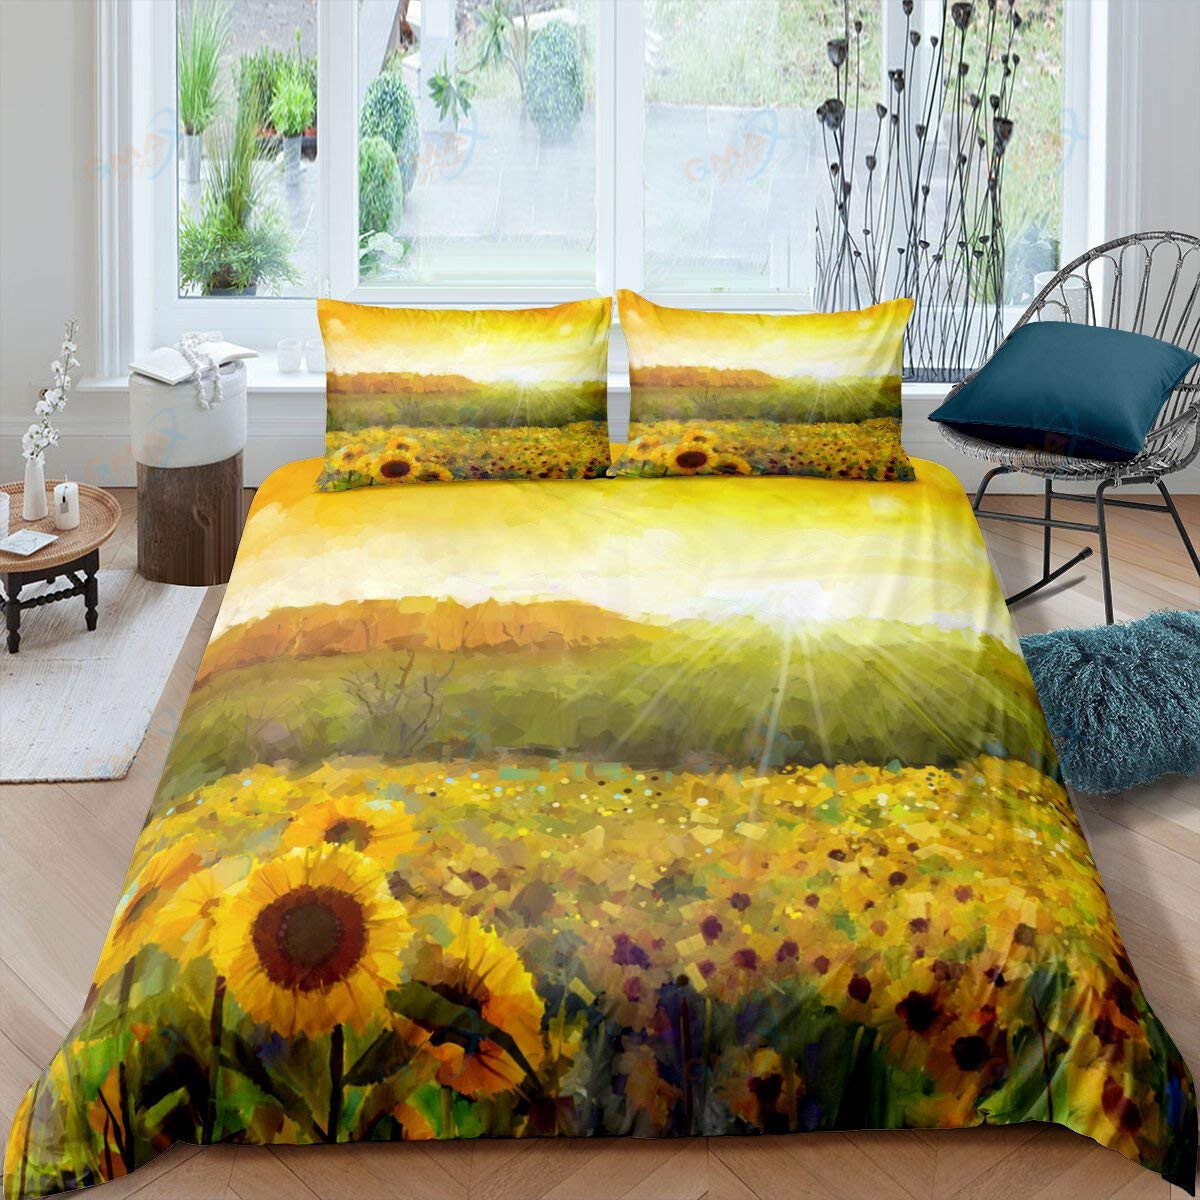 Sunflowers Duvet Cover Set Letters Bedding Set Letters and Sunflowers Printed Retro Girls Queen